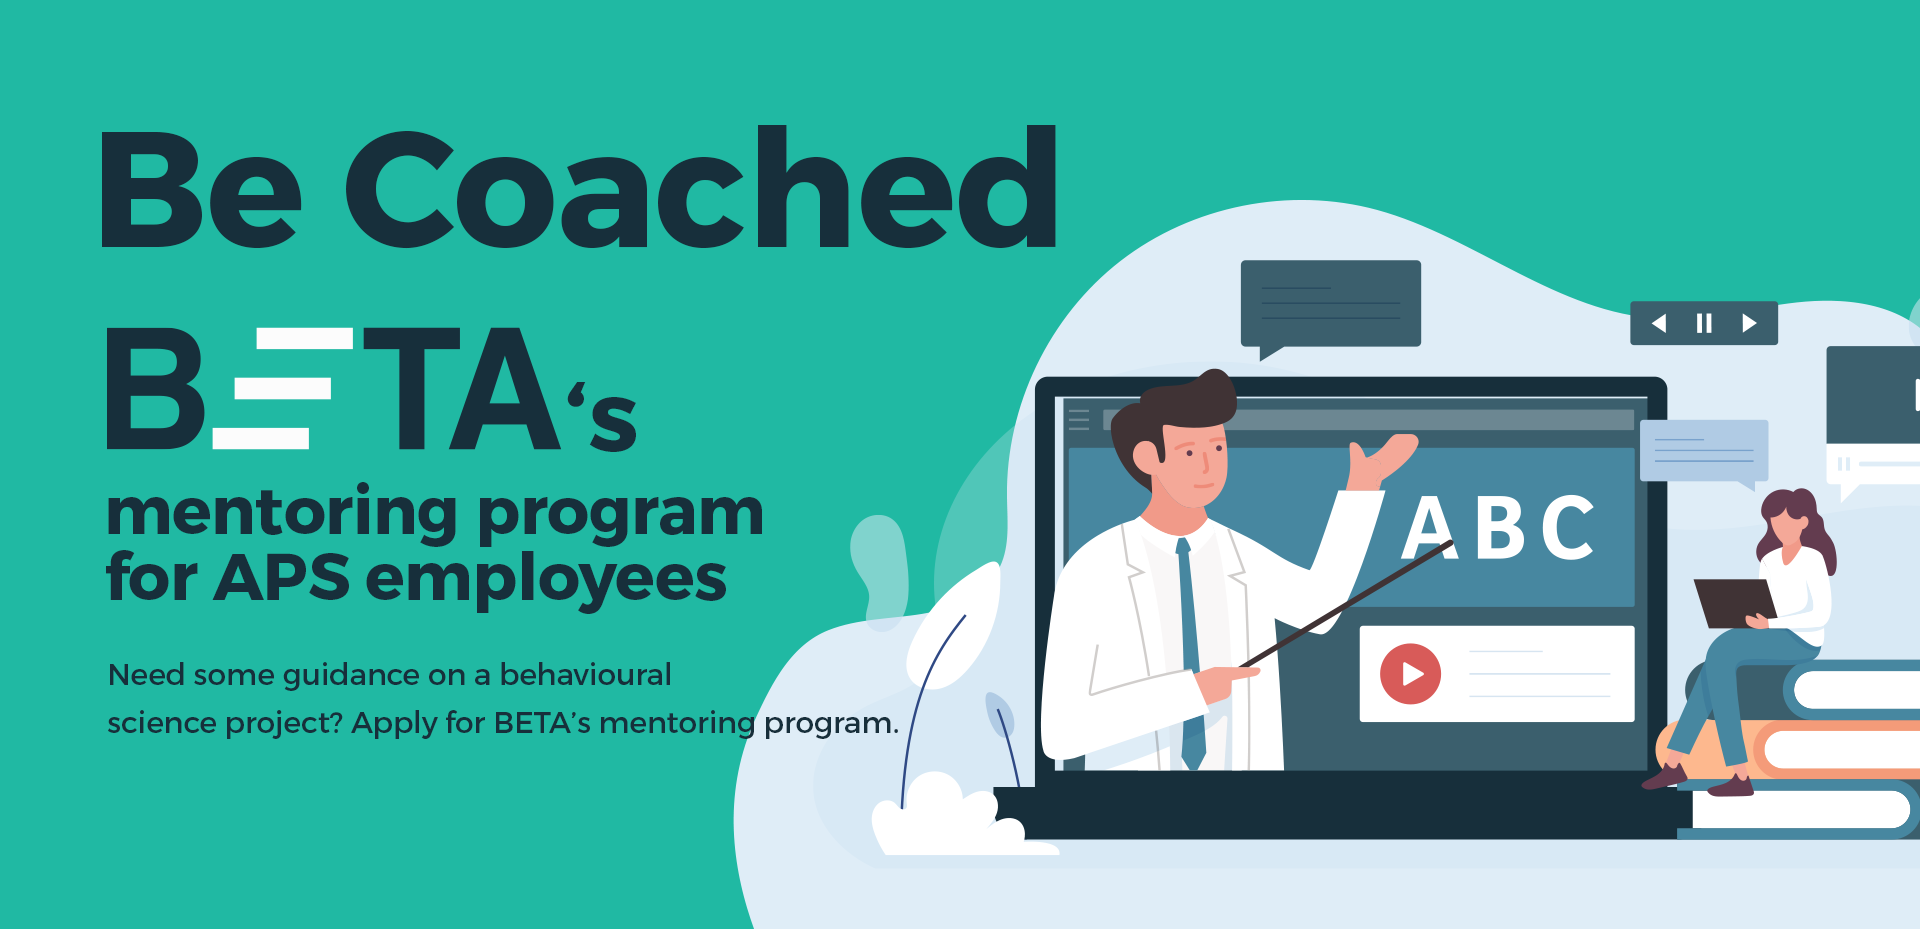 Be Coached - BETA's new mentoring program for APS employees, need some guidance on a behavioural science project? Apply for BETA's mentoring program.